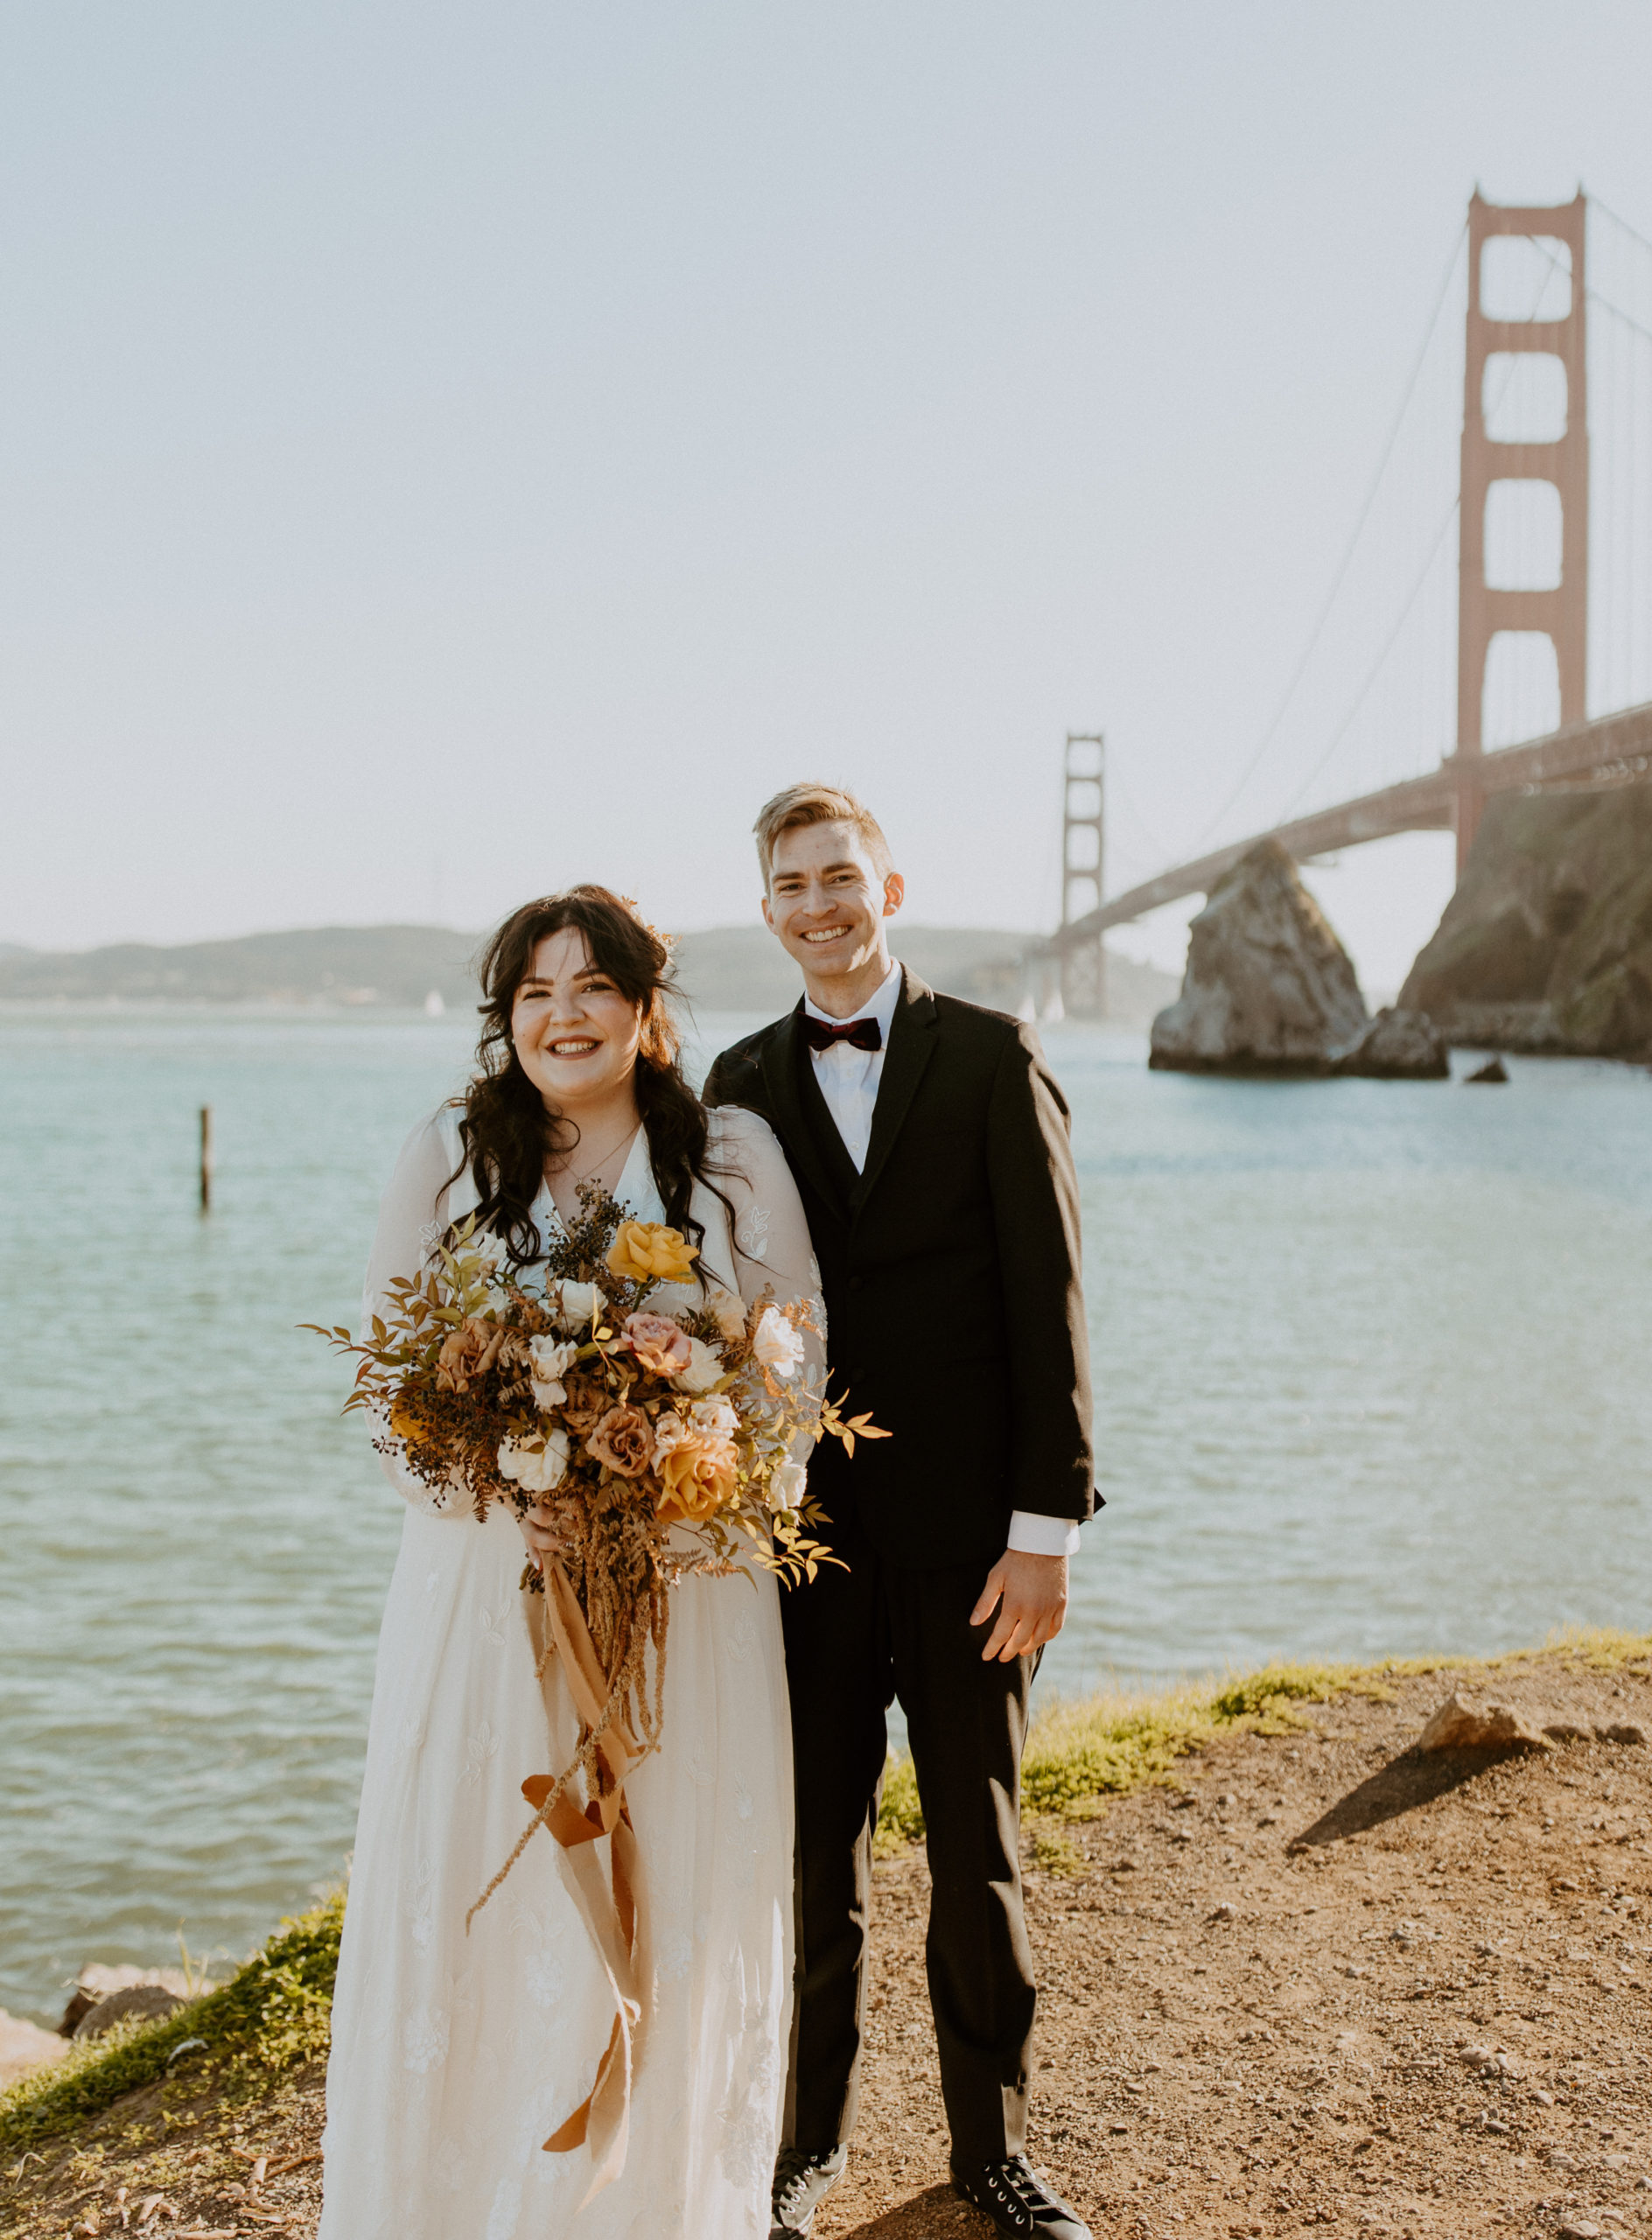 the couple standing next to the Golden Gate Bridge